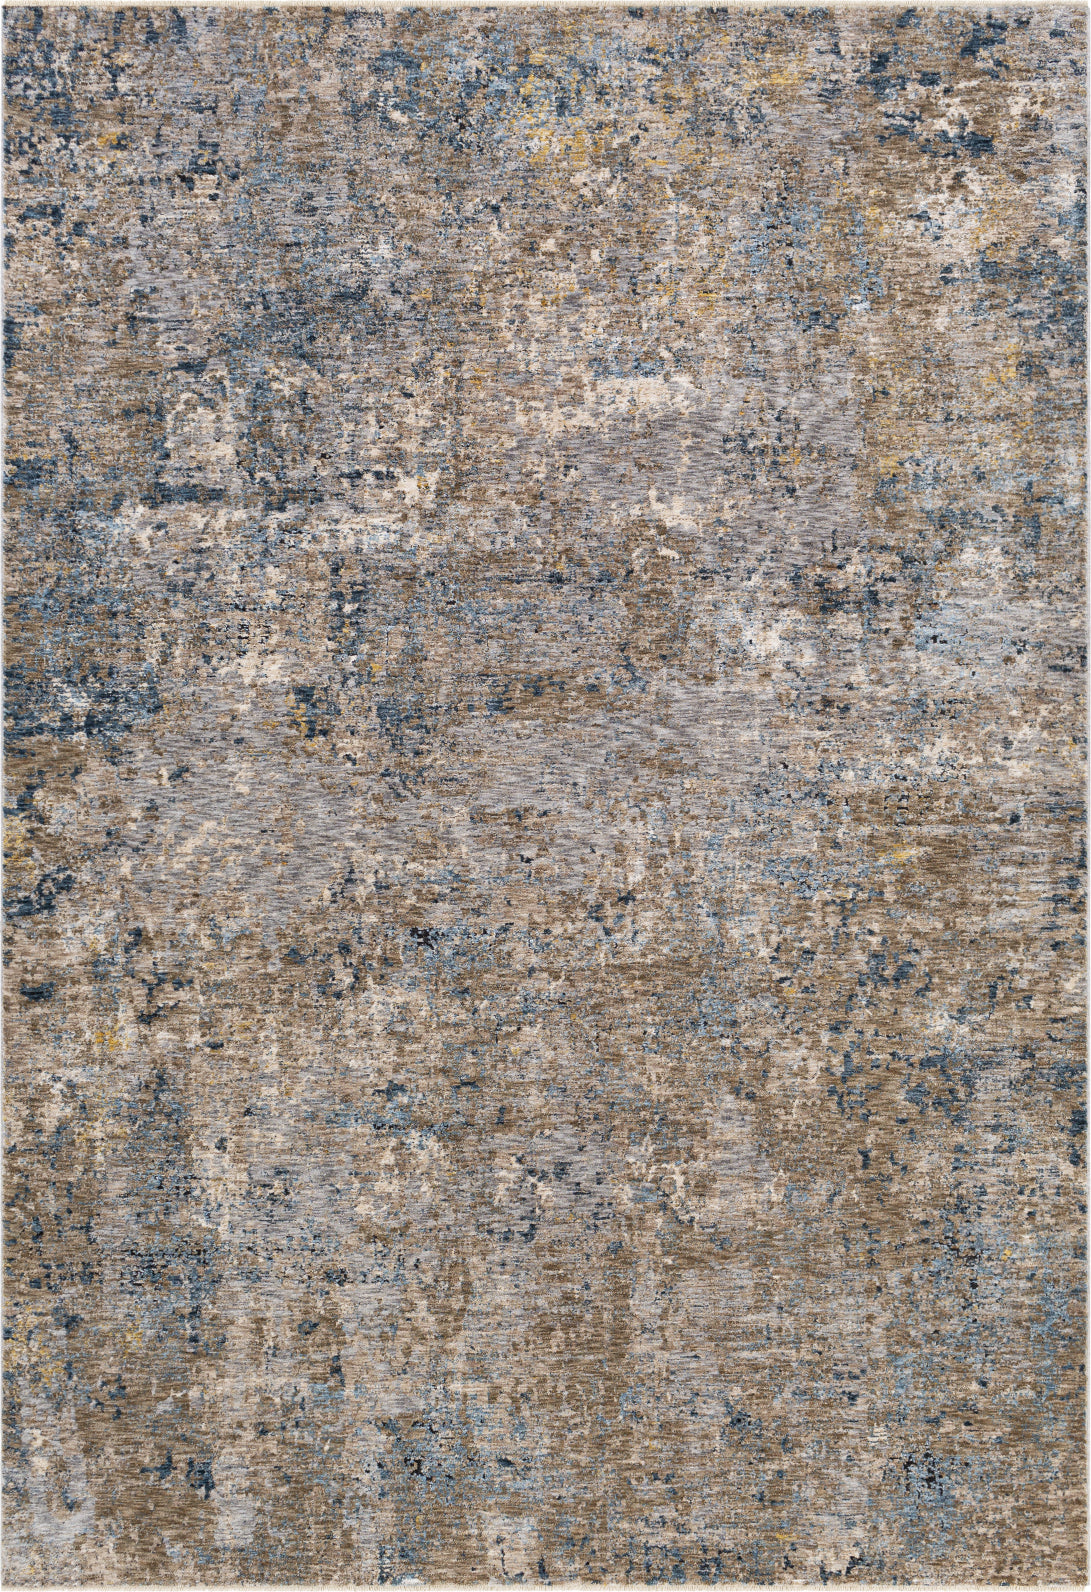 Surya Mirabel MBE-2303 Area Rug by Artistic Weavers Main Image 6'7"x9'6" Size 